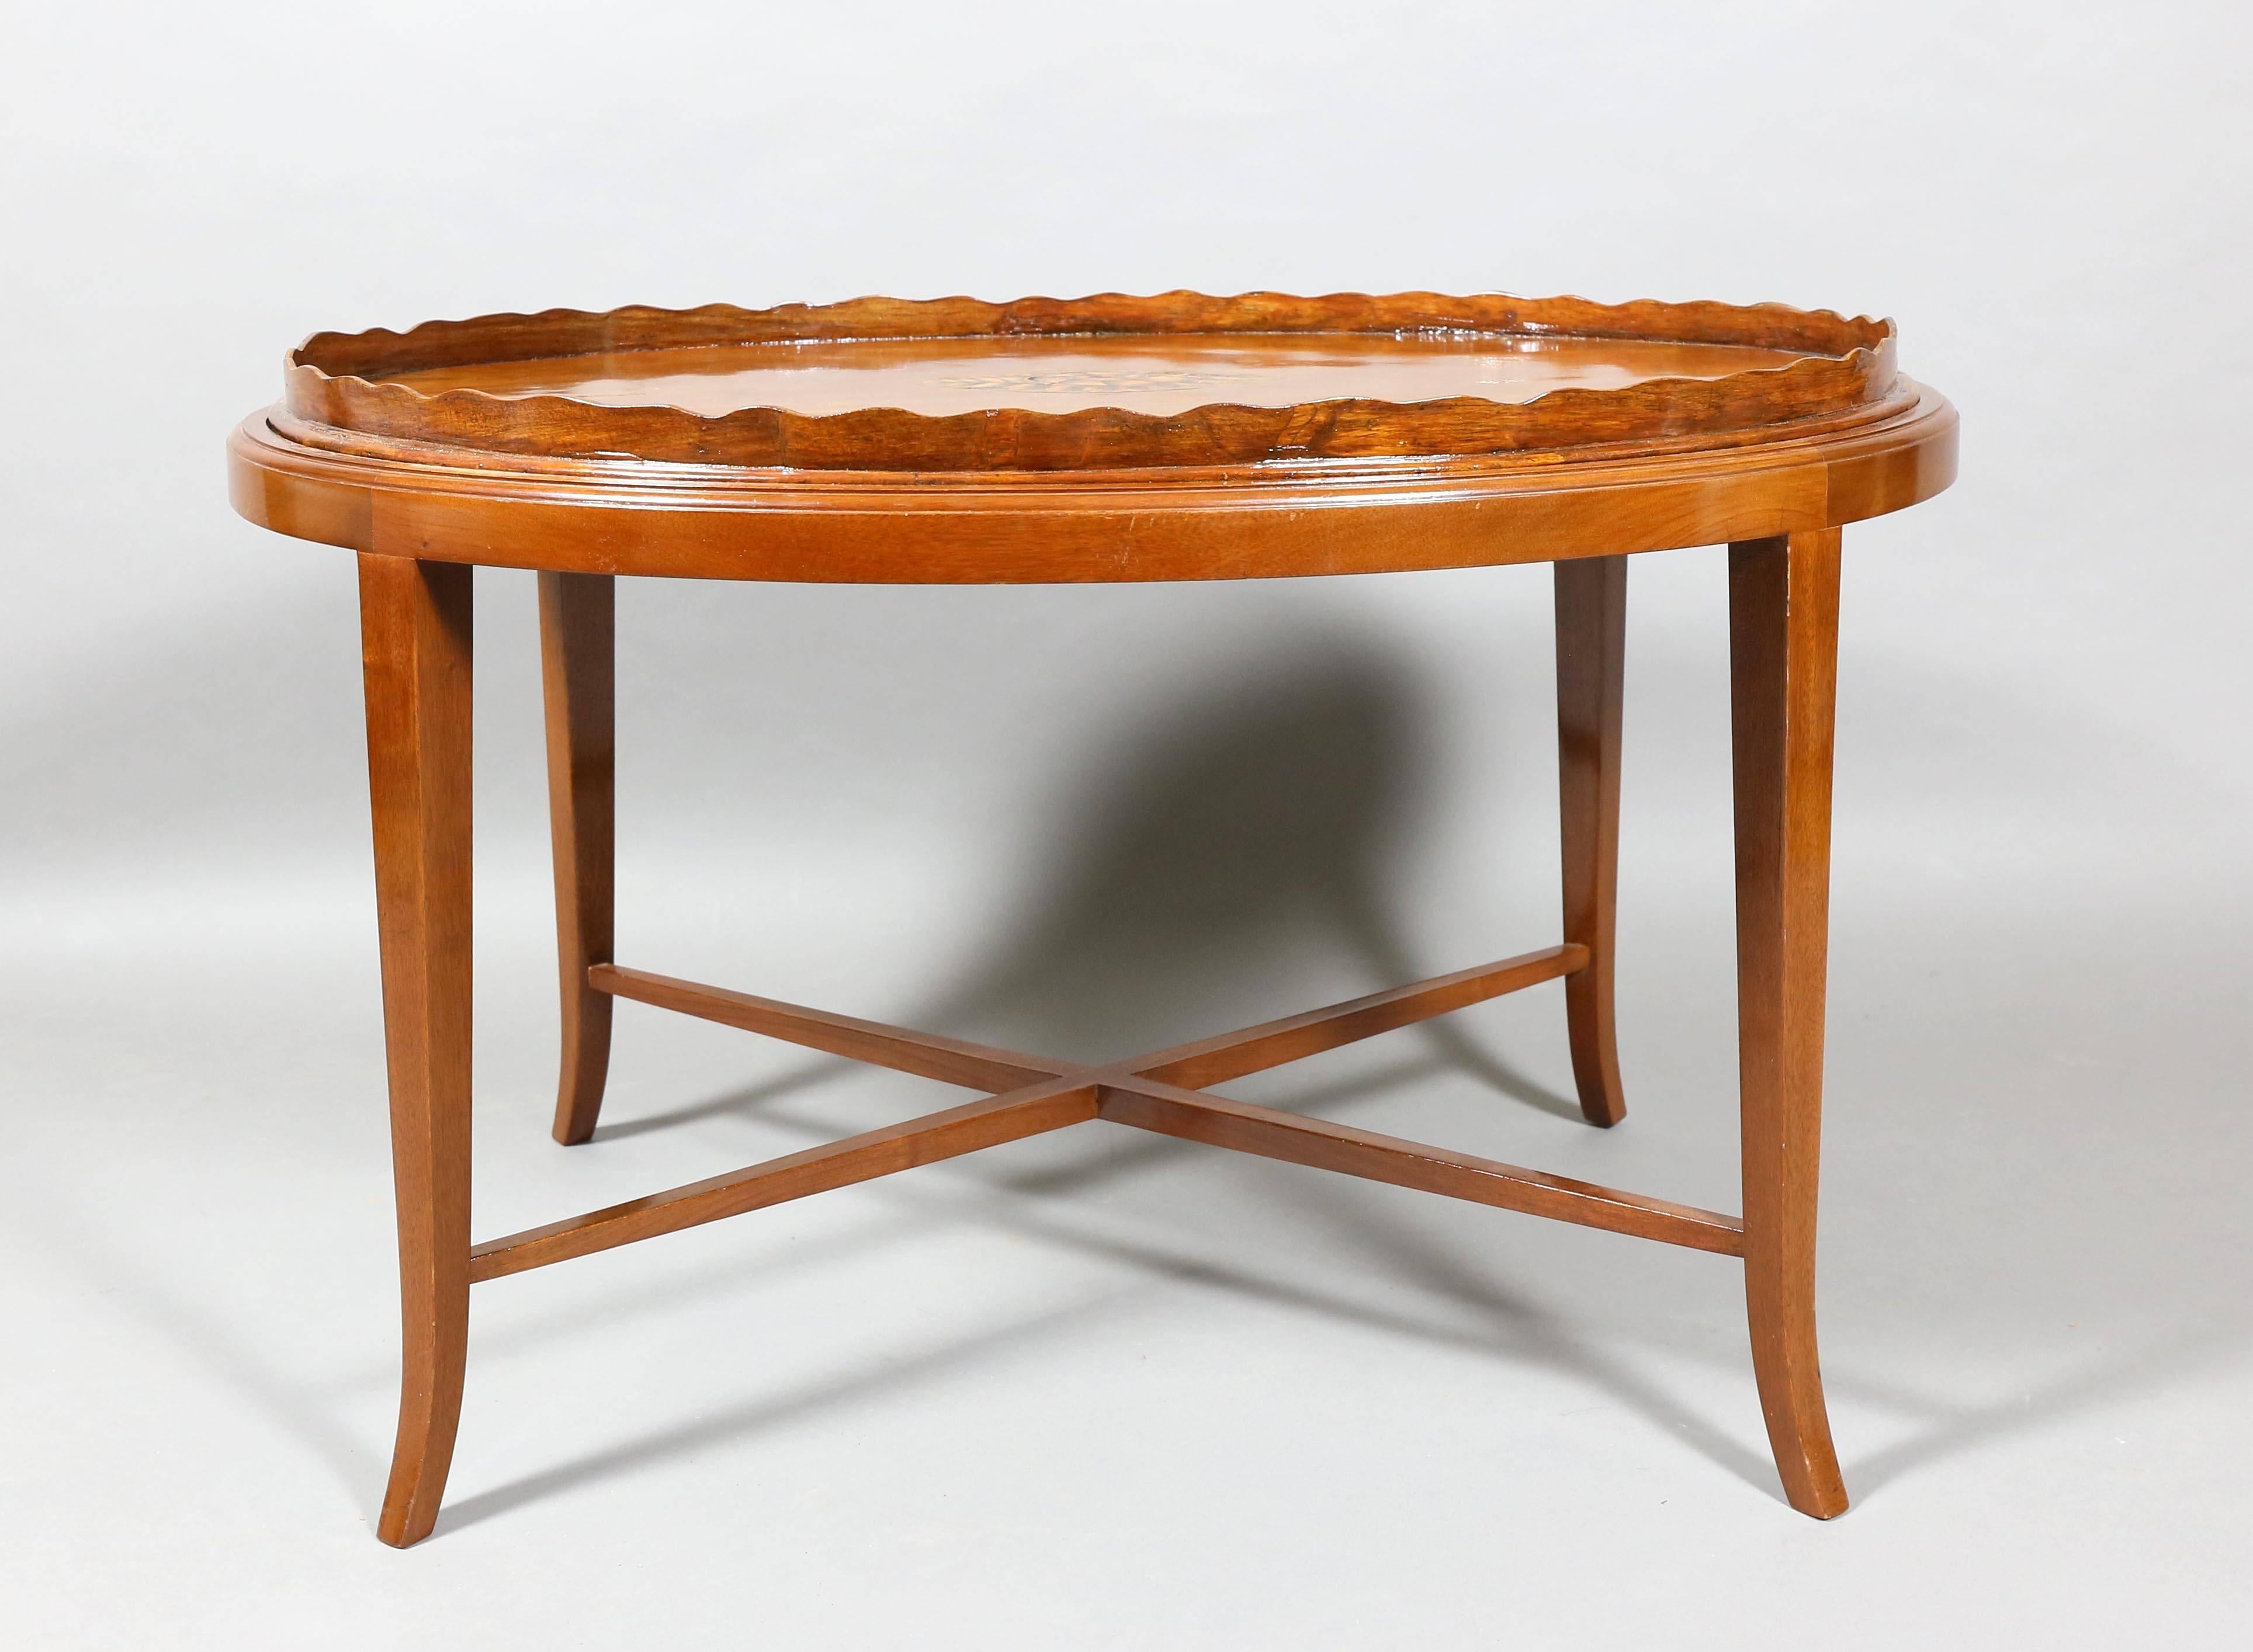 The tray oval with serrated edge with central inlaid shell raised on square tapered legs with X-form stretcher.